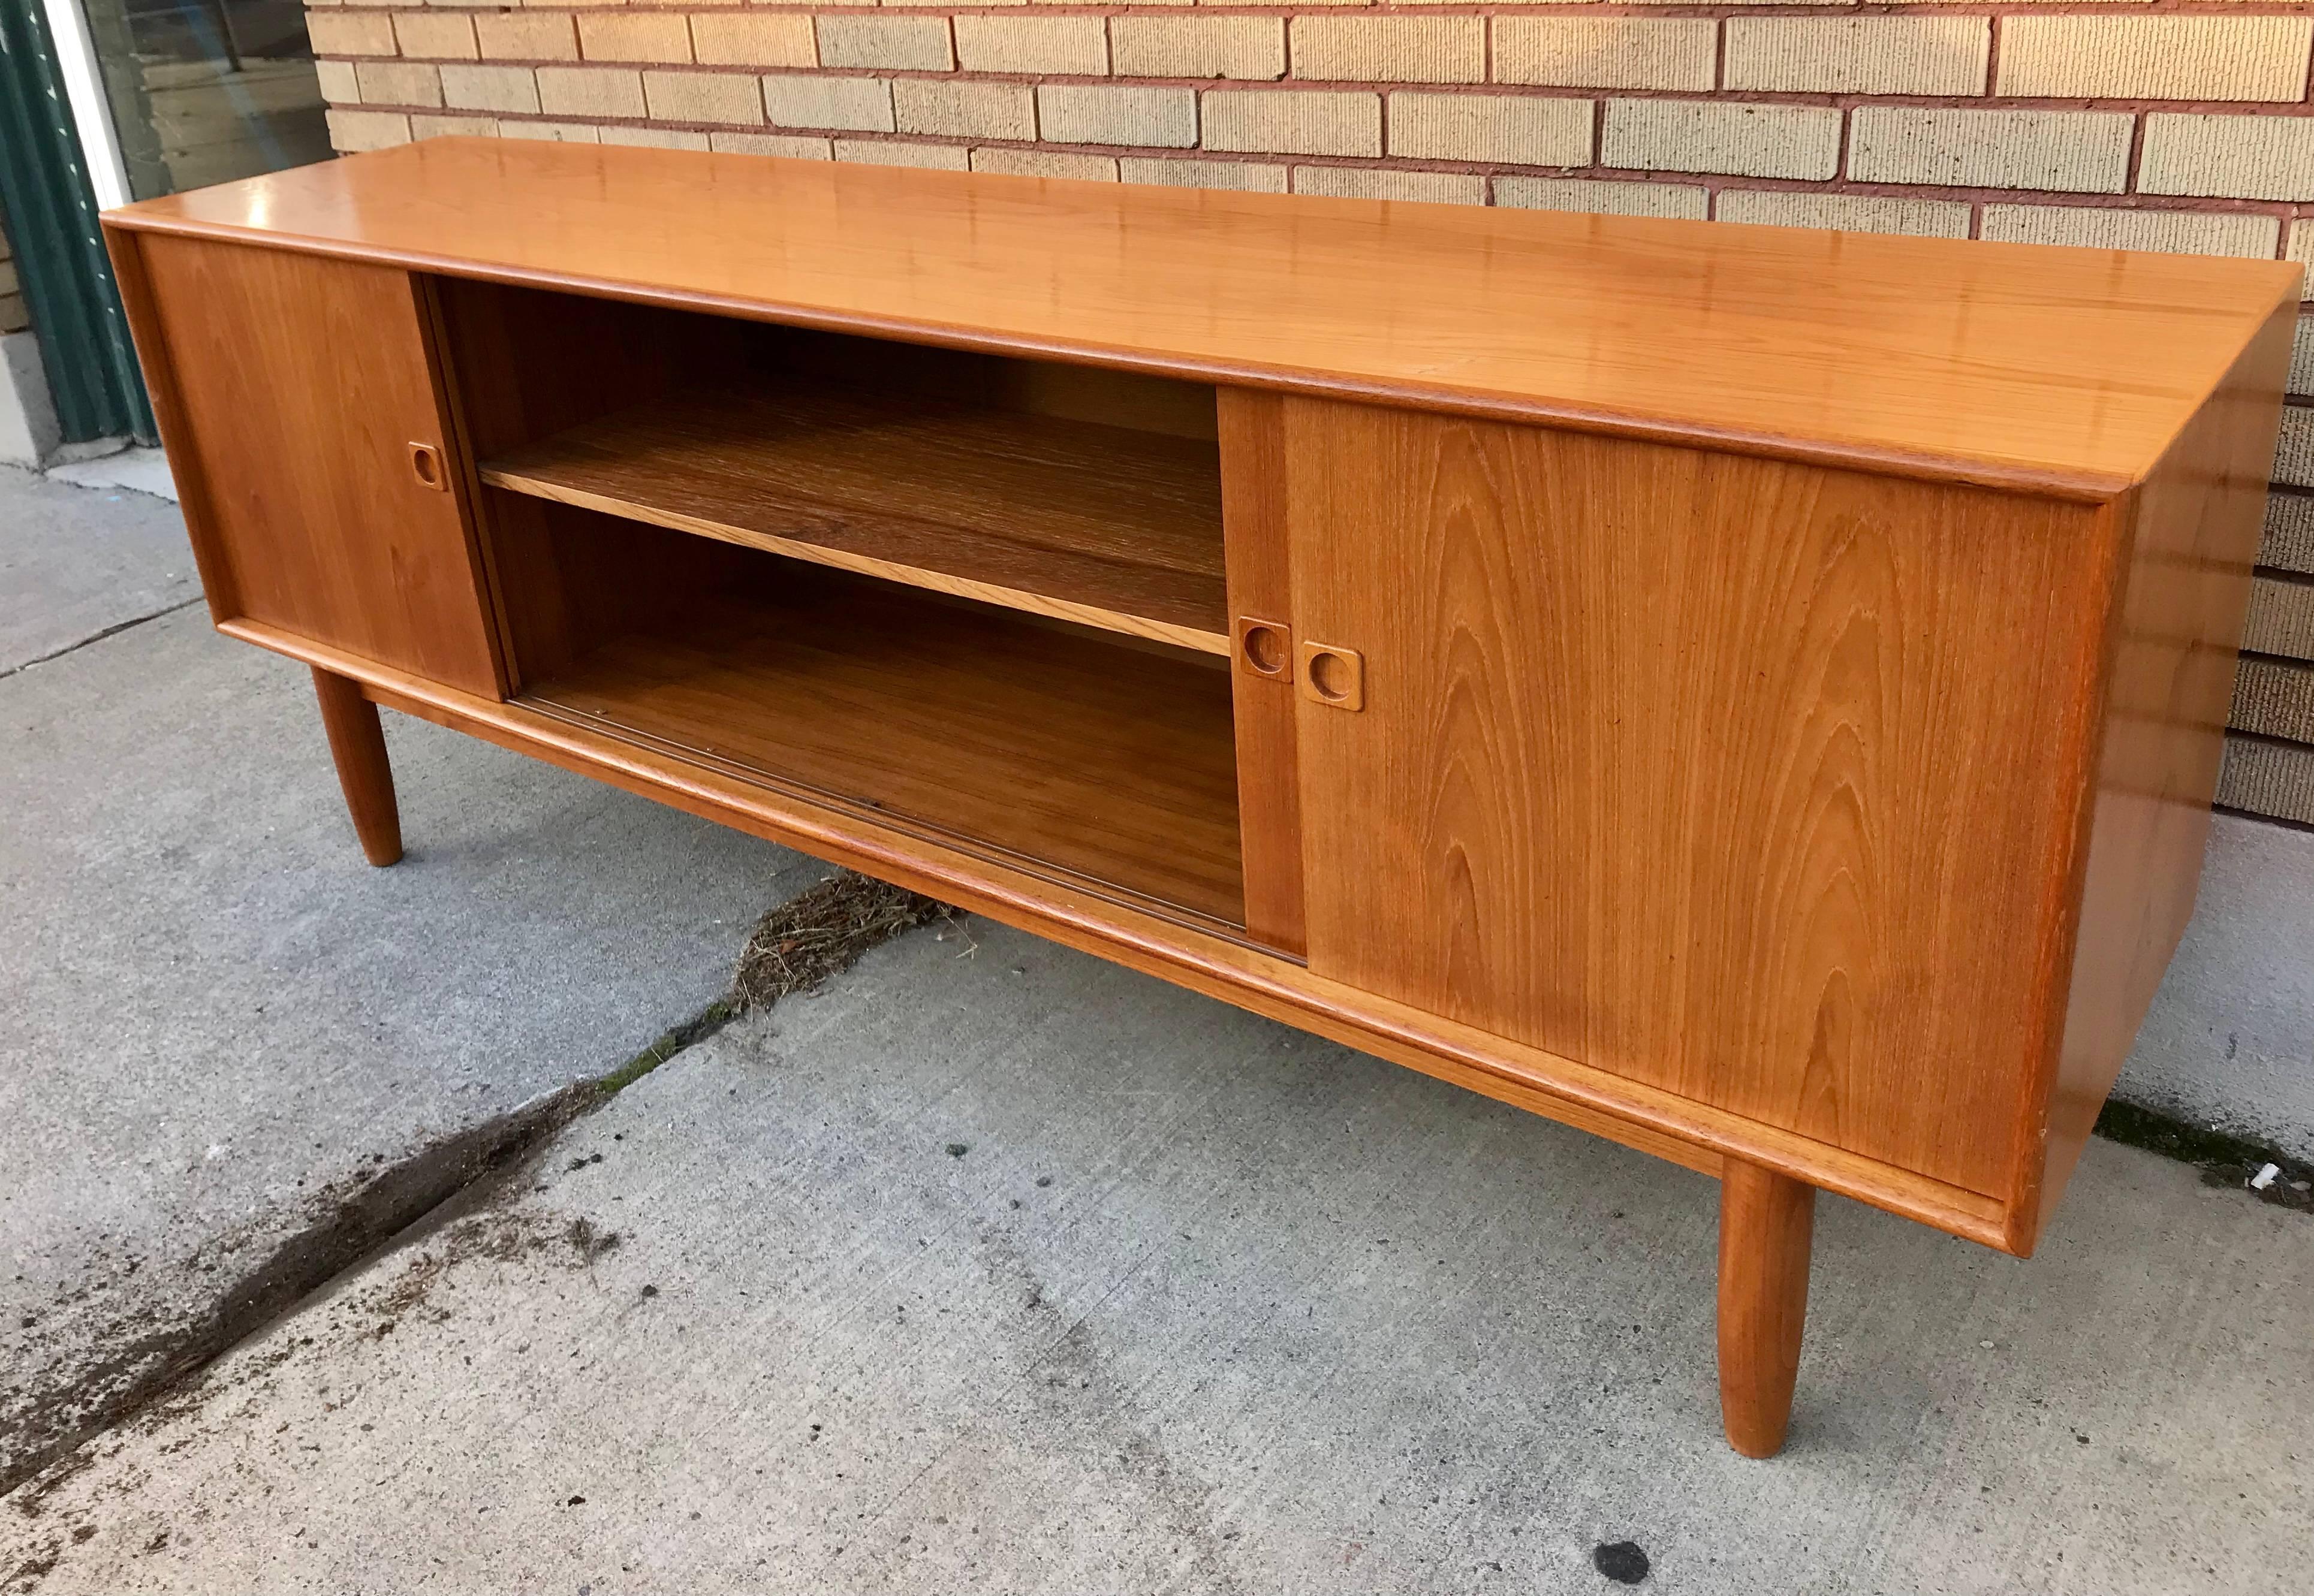 Classic Danish Modern Credenza or Sideboard by Illum Wikkelso 1